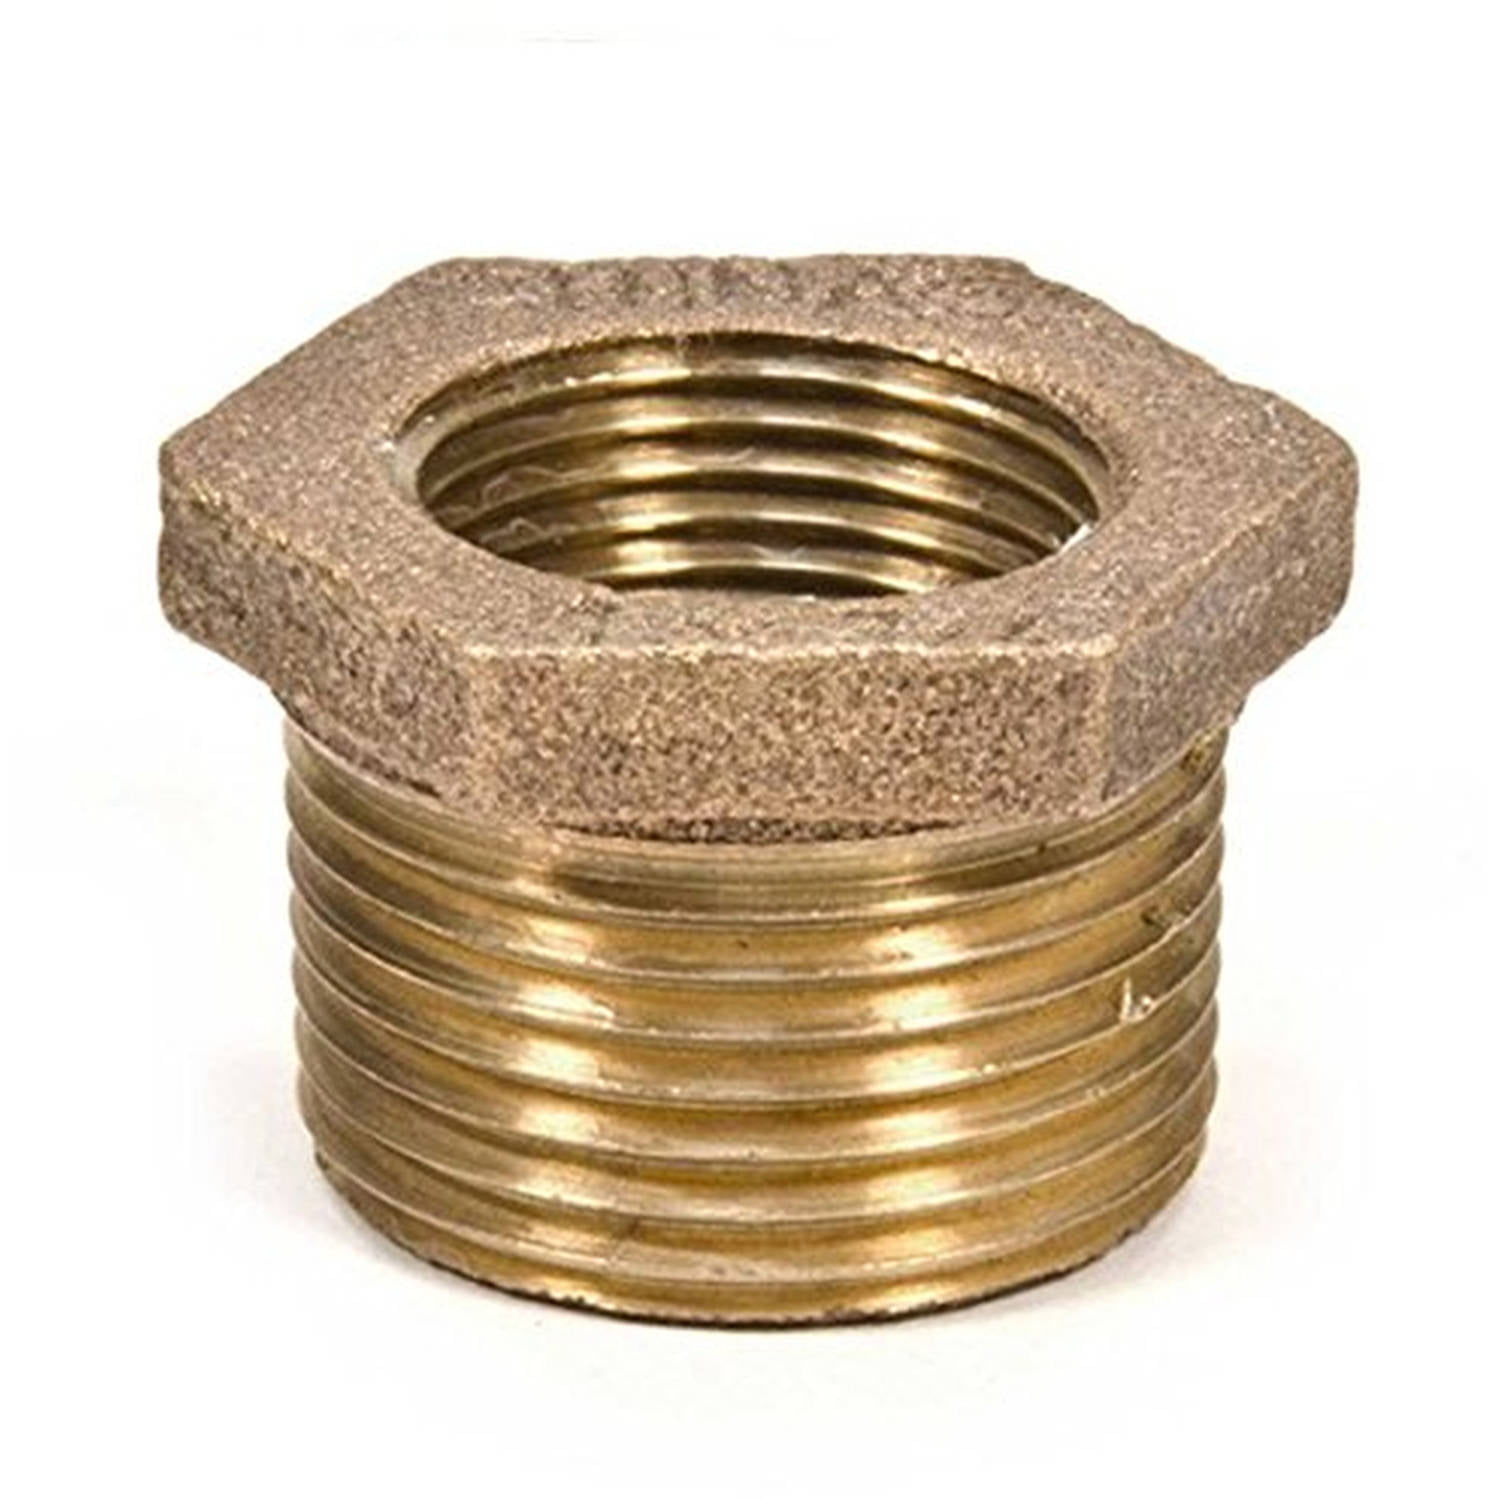 Brass Construction Higher Corrosion Resistance Economical & Easy to Install Everflow BRBU0342-NL 3/4 Inch Male NPT X 3/8 Inch Female NPT Brass Lead Free Bushing Fitting with Hexagonal Head